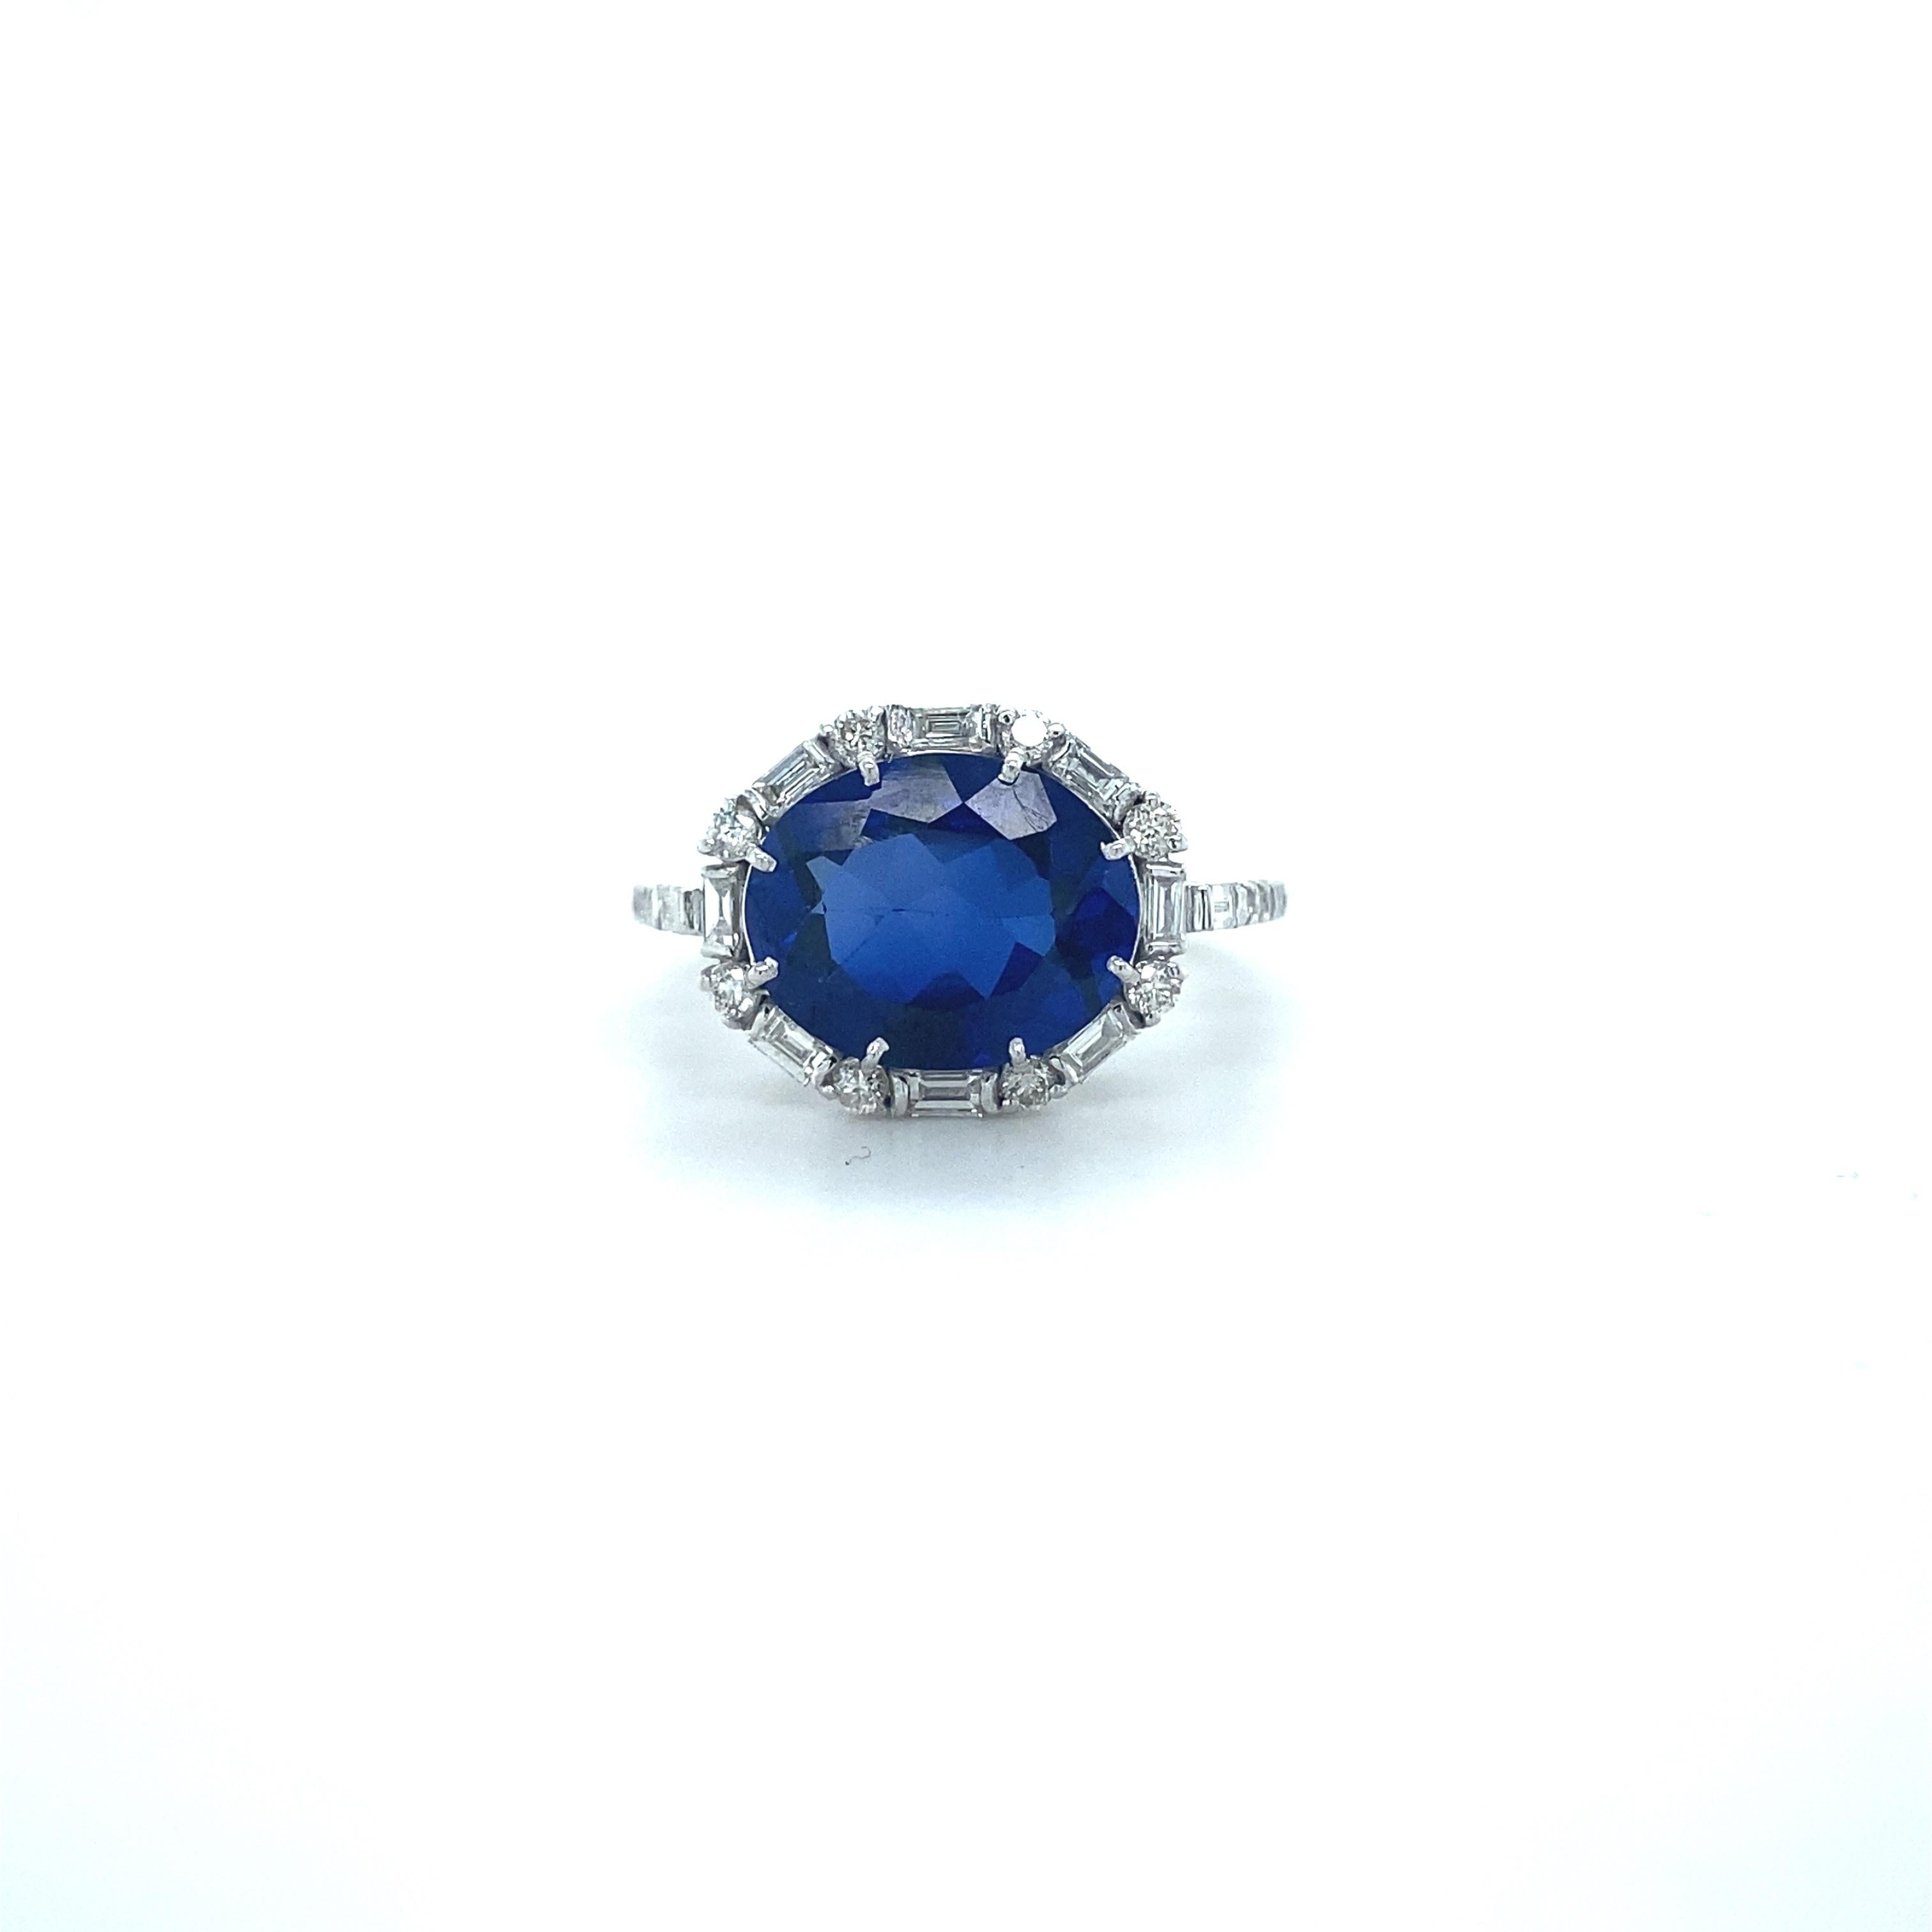 For Sale:  3-carat Oval Blue Sapphire and Diamonds Ring in 18k Solid Gold 4